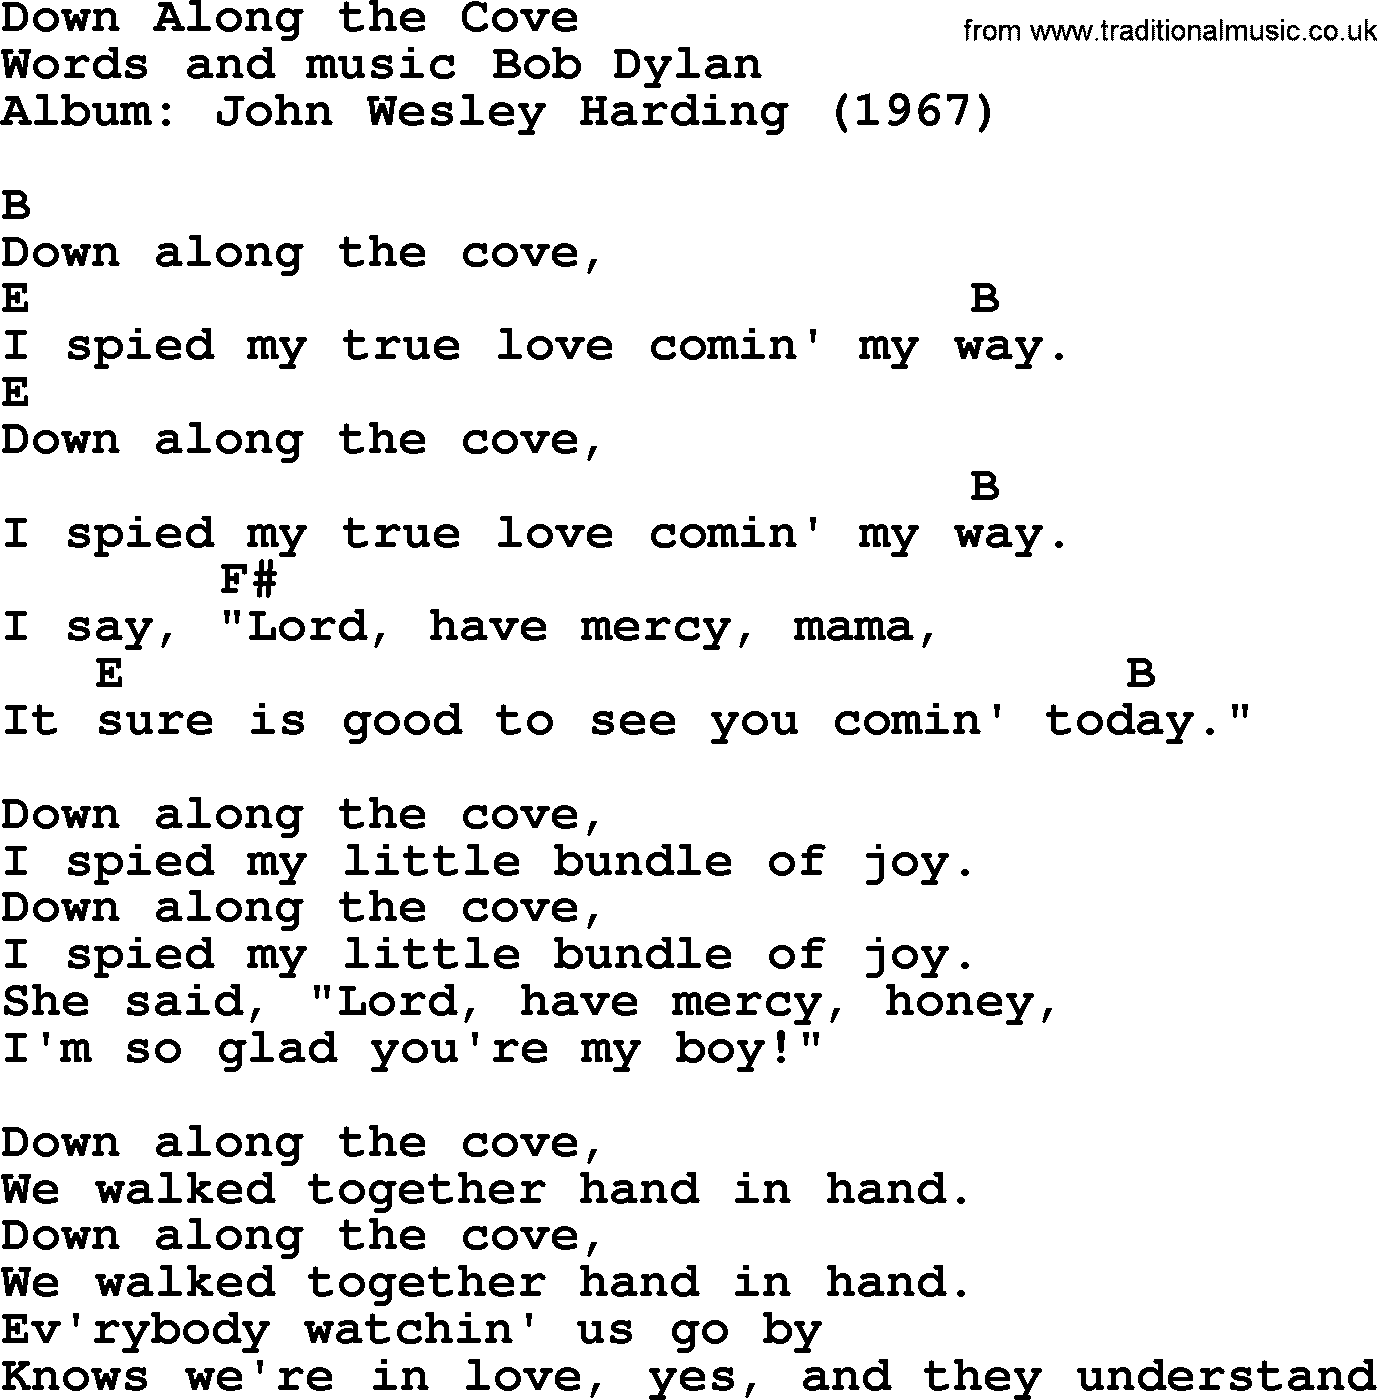 Bob Dylan song, lyrics with chords - Down Along the Cove